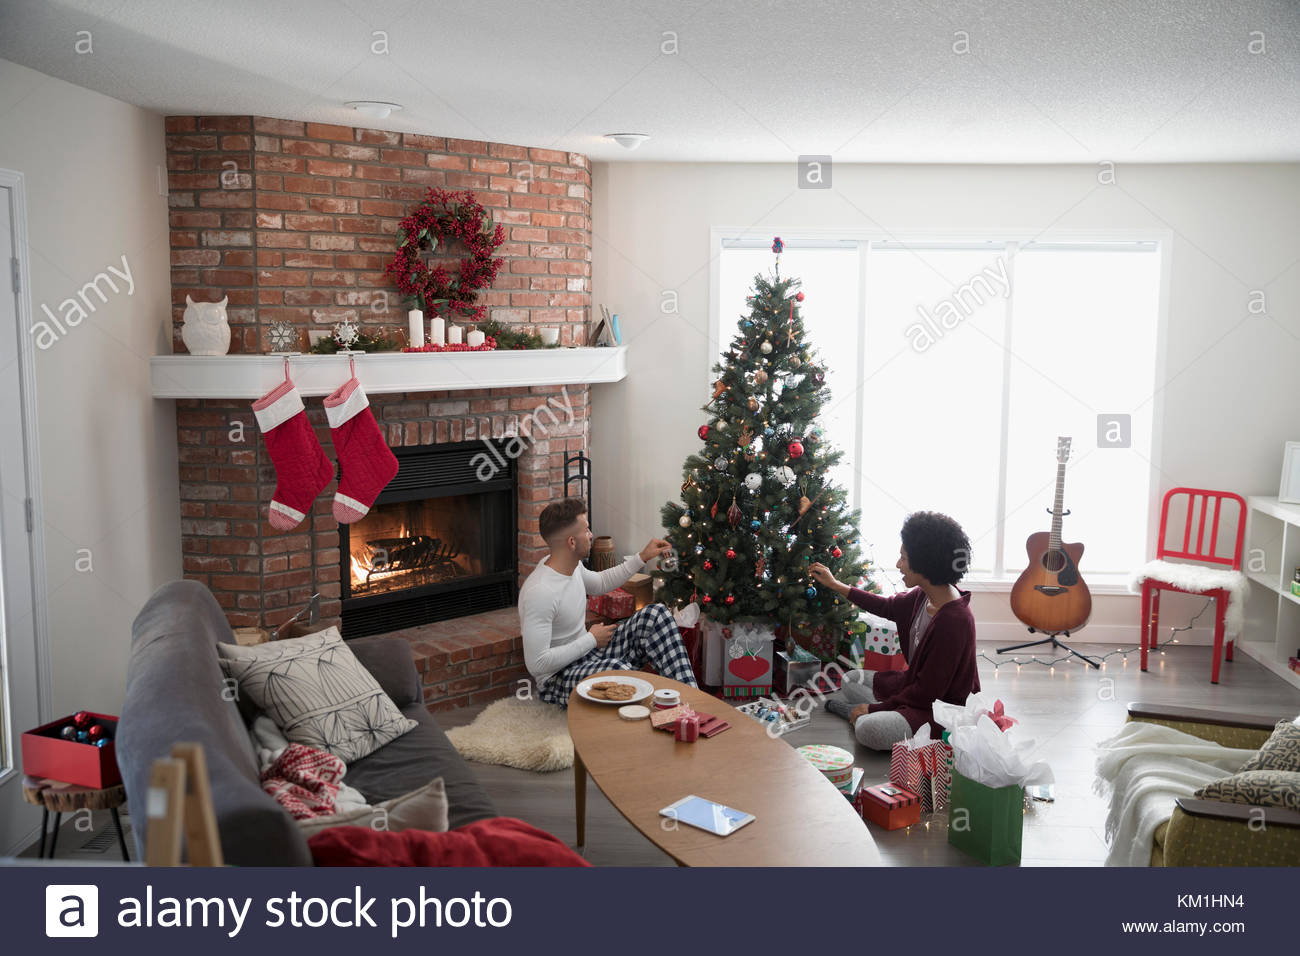 Young couple in pajamas decorating, hanging ornaments on Christmas tree in living room Stock Photo